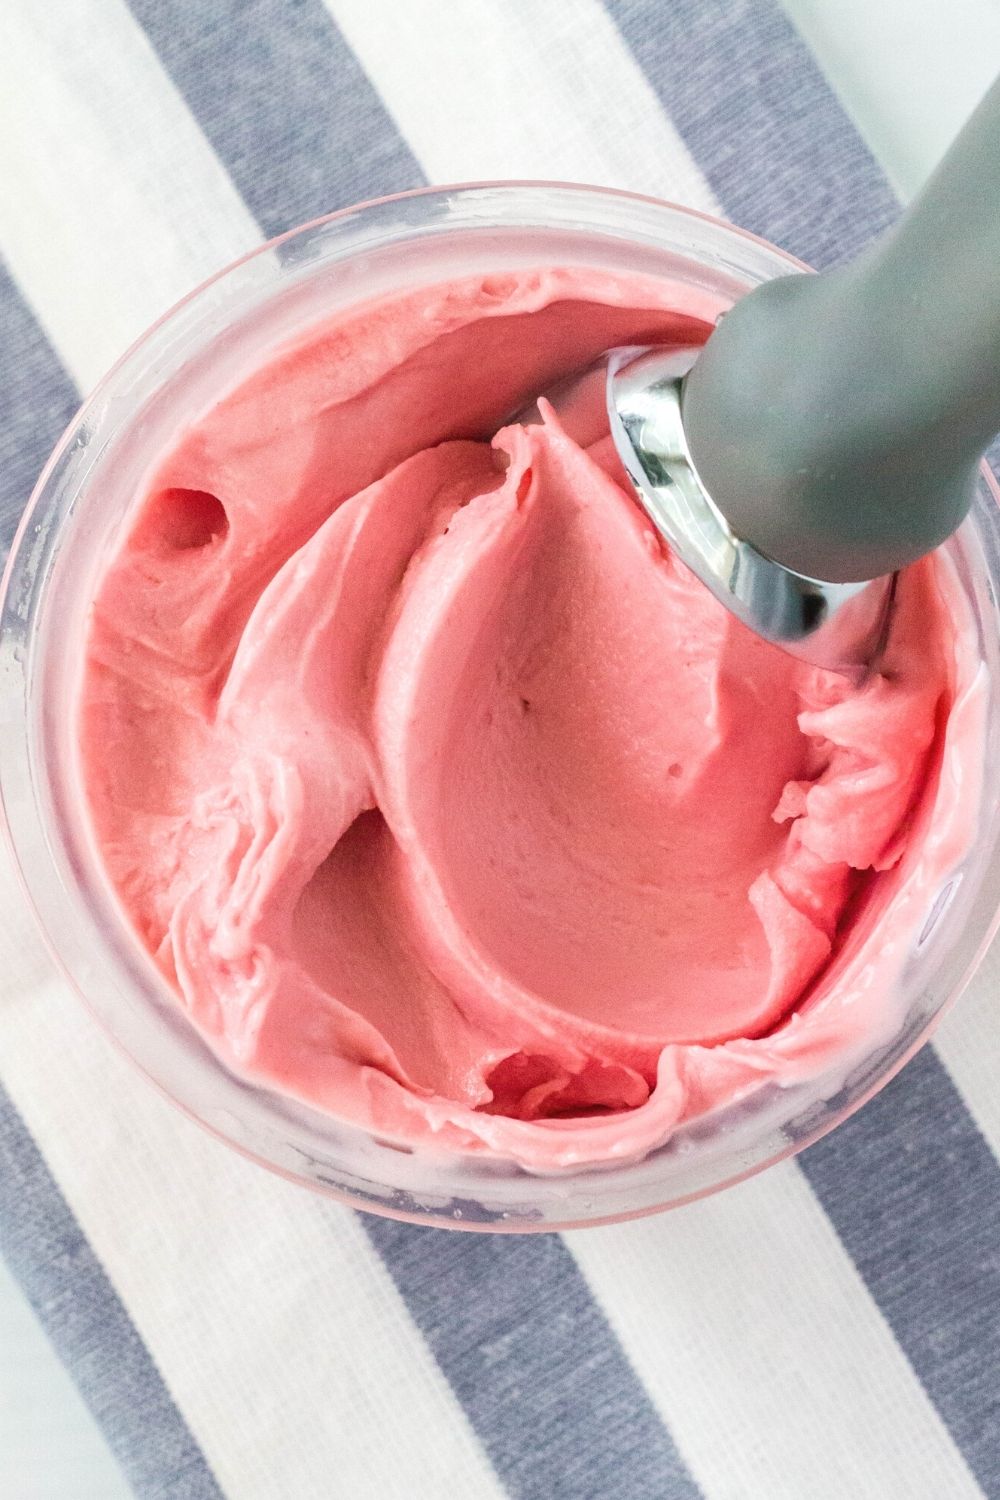 overhead view of a pint container filled with ninja creami cherry cheesecake flavored ice cream, with a scoop in the ice cream giving the top a swirled appearance.